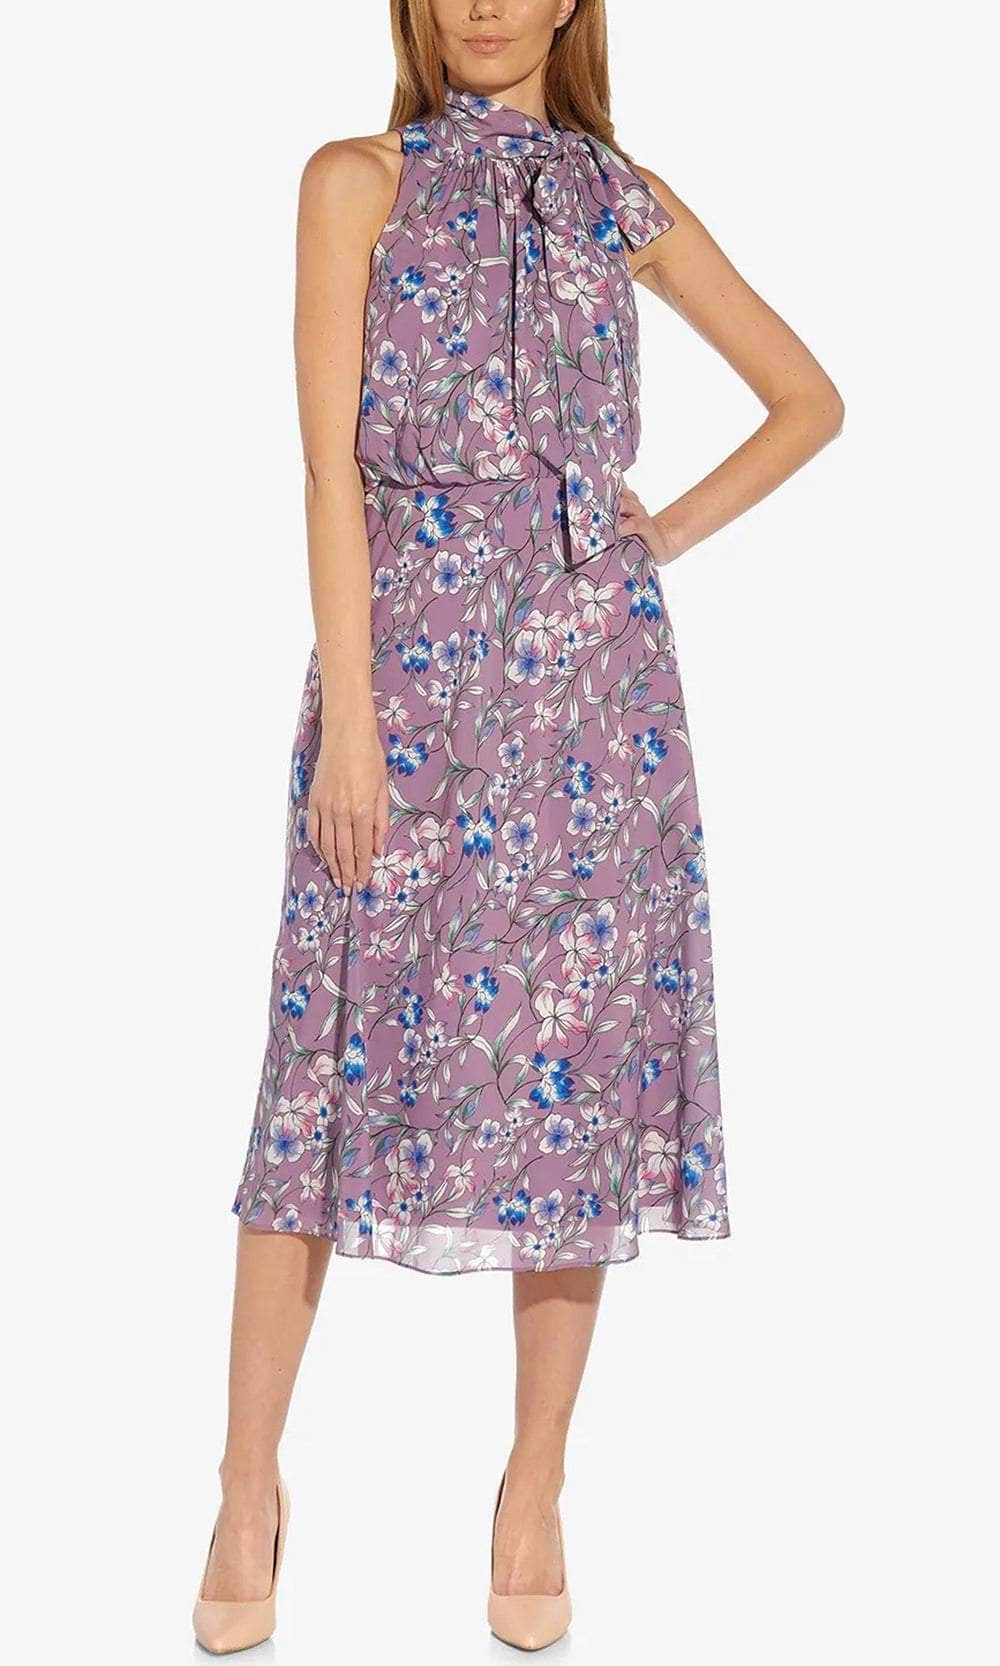 Adrianna Papell AP1D104621 - Halter Floral Casual Dress
